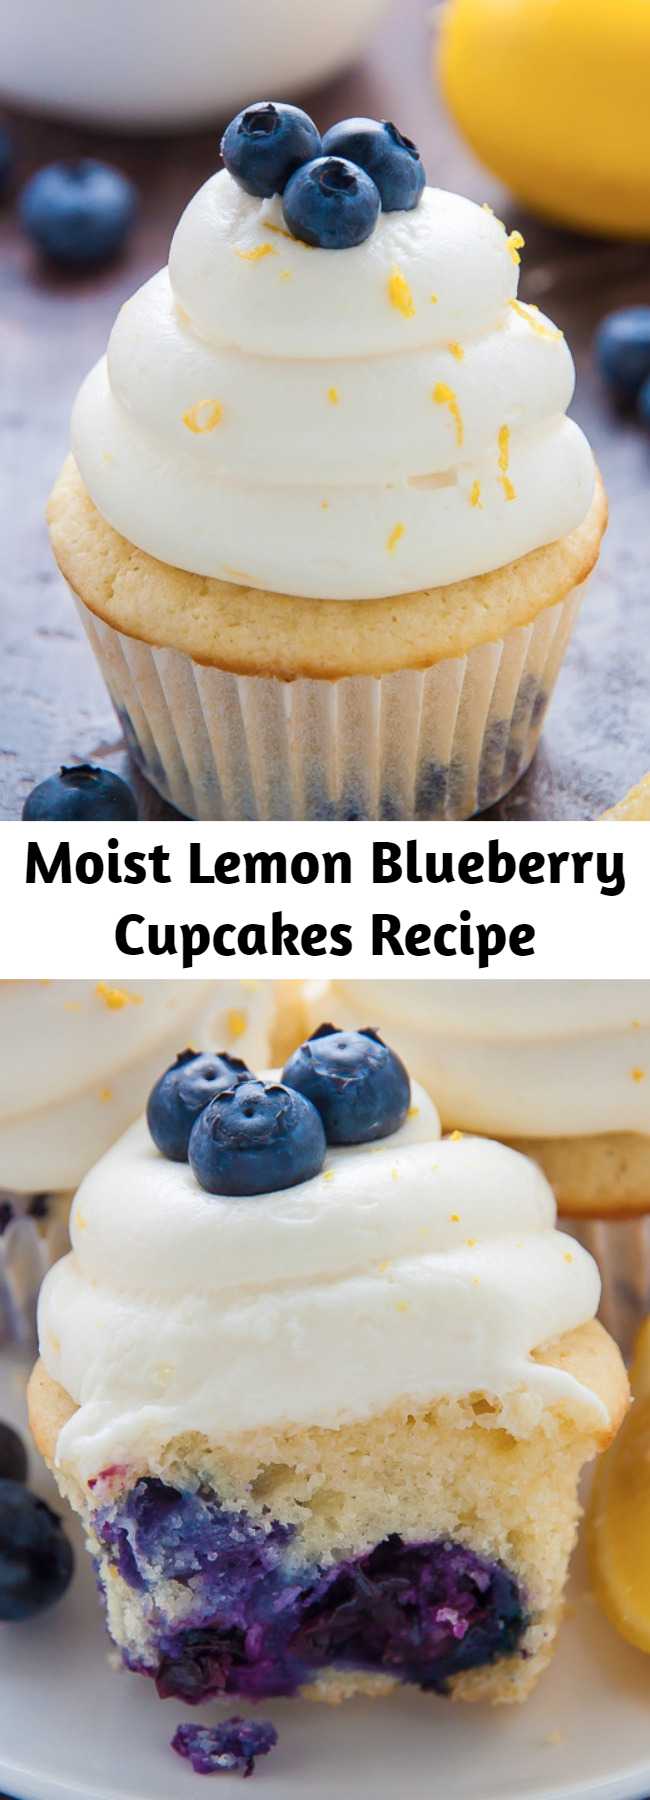 Moist Lemon Blueberry Cupcakes Recipe - Homemade Lemon Blueberry Cupcakes are topped with luscious Lemon Cream Cheese Frosting and Fresh Blueberries! The moist lemon cupcakes are so flavorful and bursting with juicy blueberries. This recipe is such a crowd-pleaser and perfect for Summer birthday parties, picnics, or barbecues!